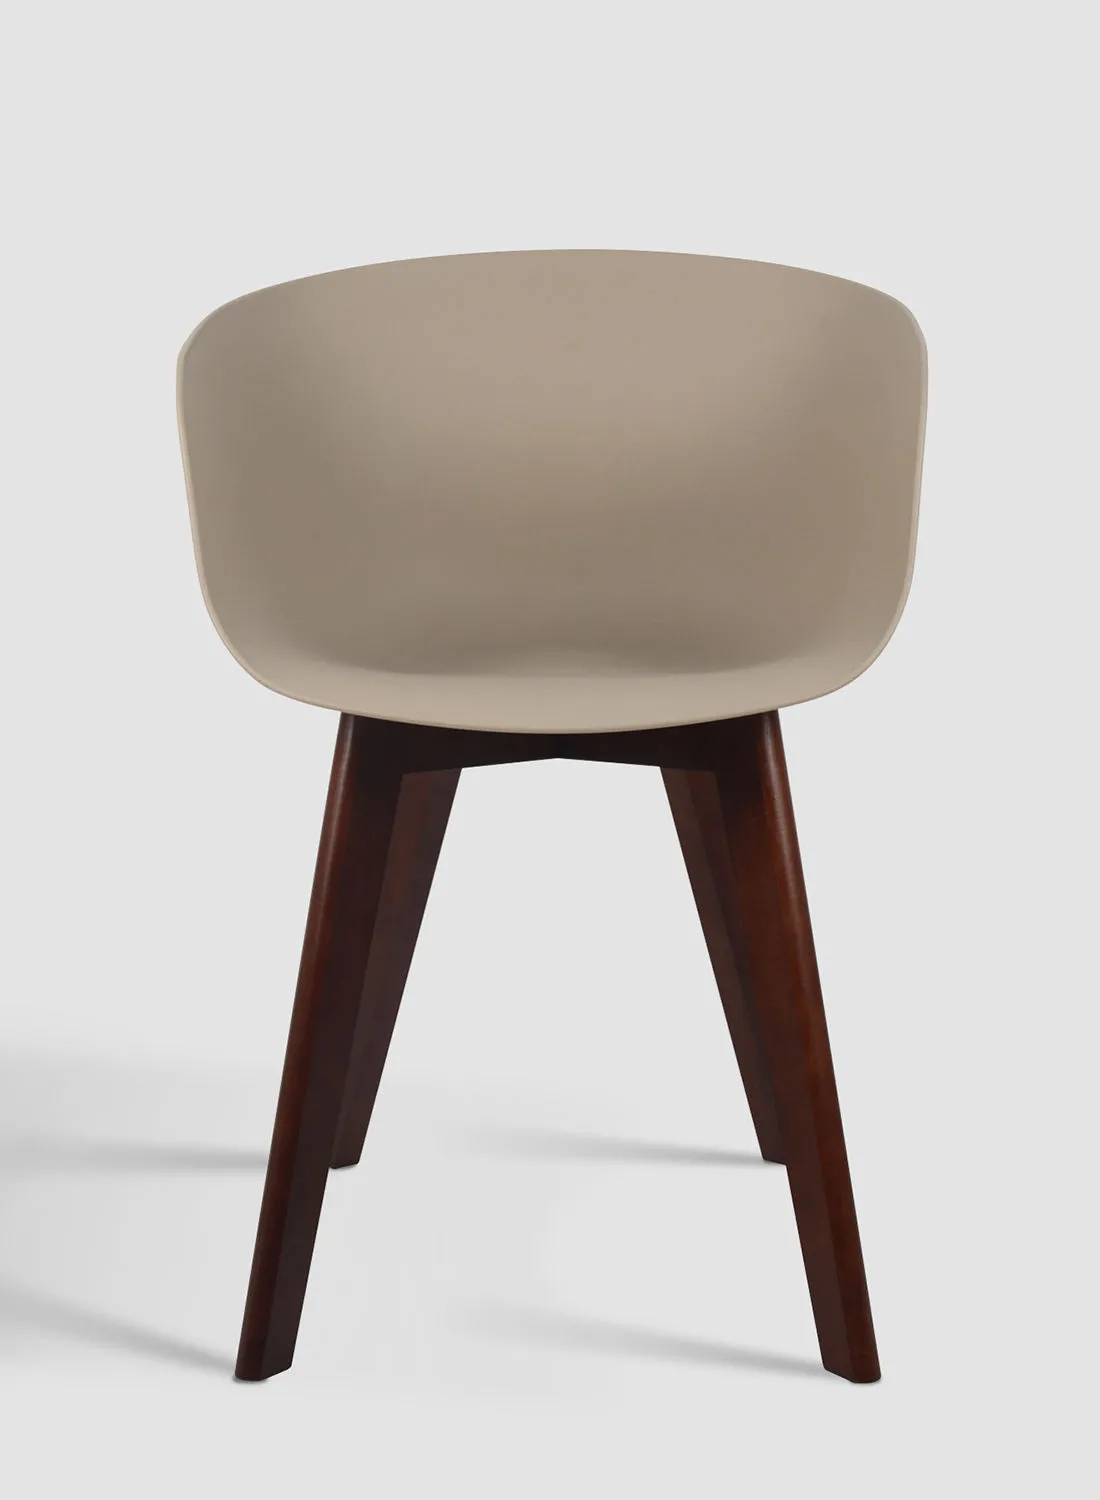 Switch Dining Chair In Beige Wooden Chair Size 53 X 55 X 80